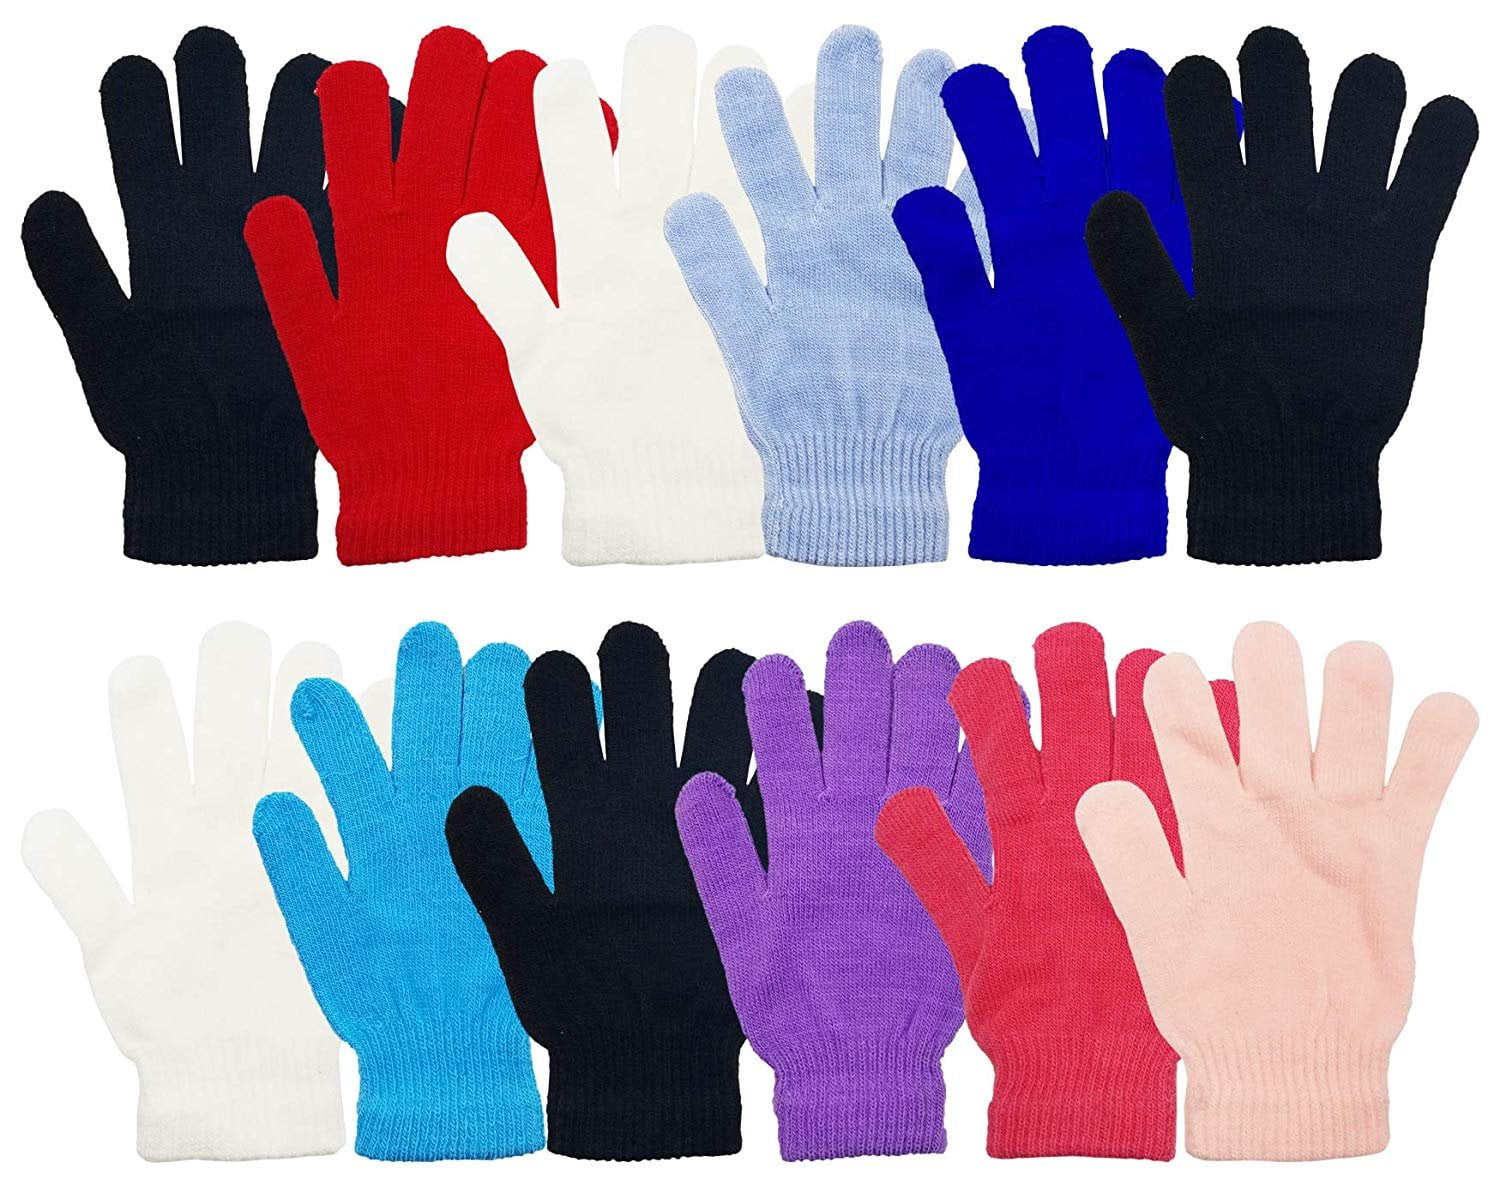 3 Pair Unisex Mens Ladies Girls Warmed Magic Gloves Stretchable One Size Fit All 